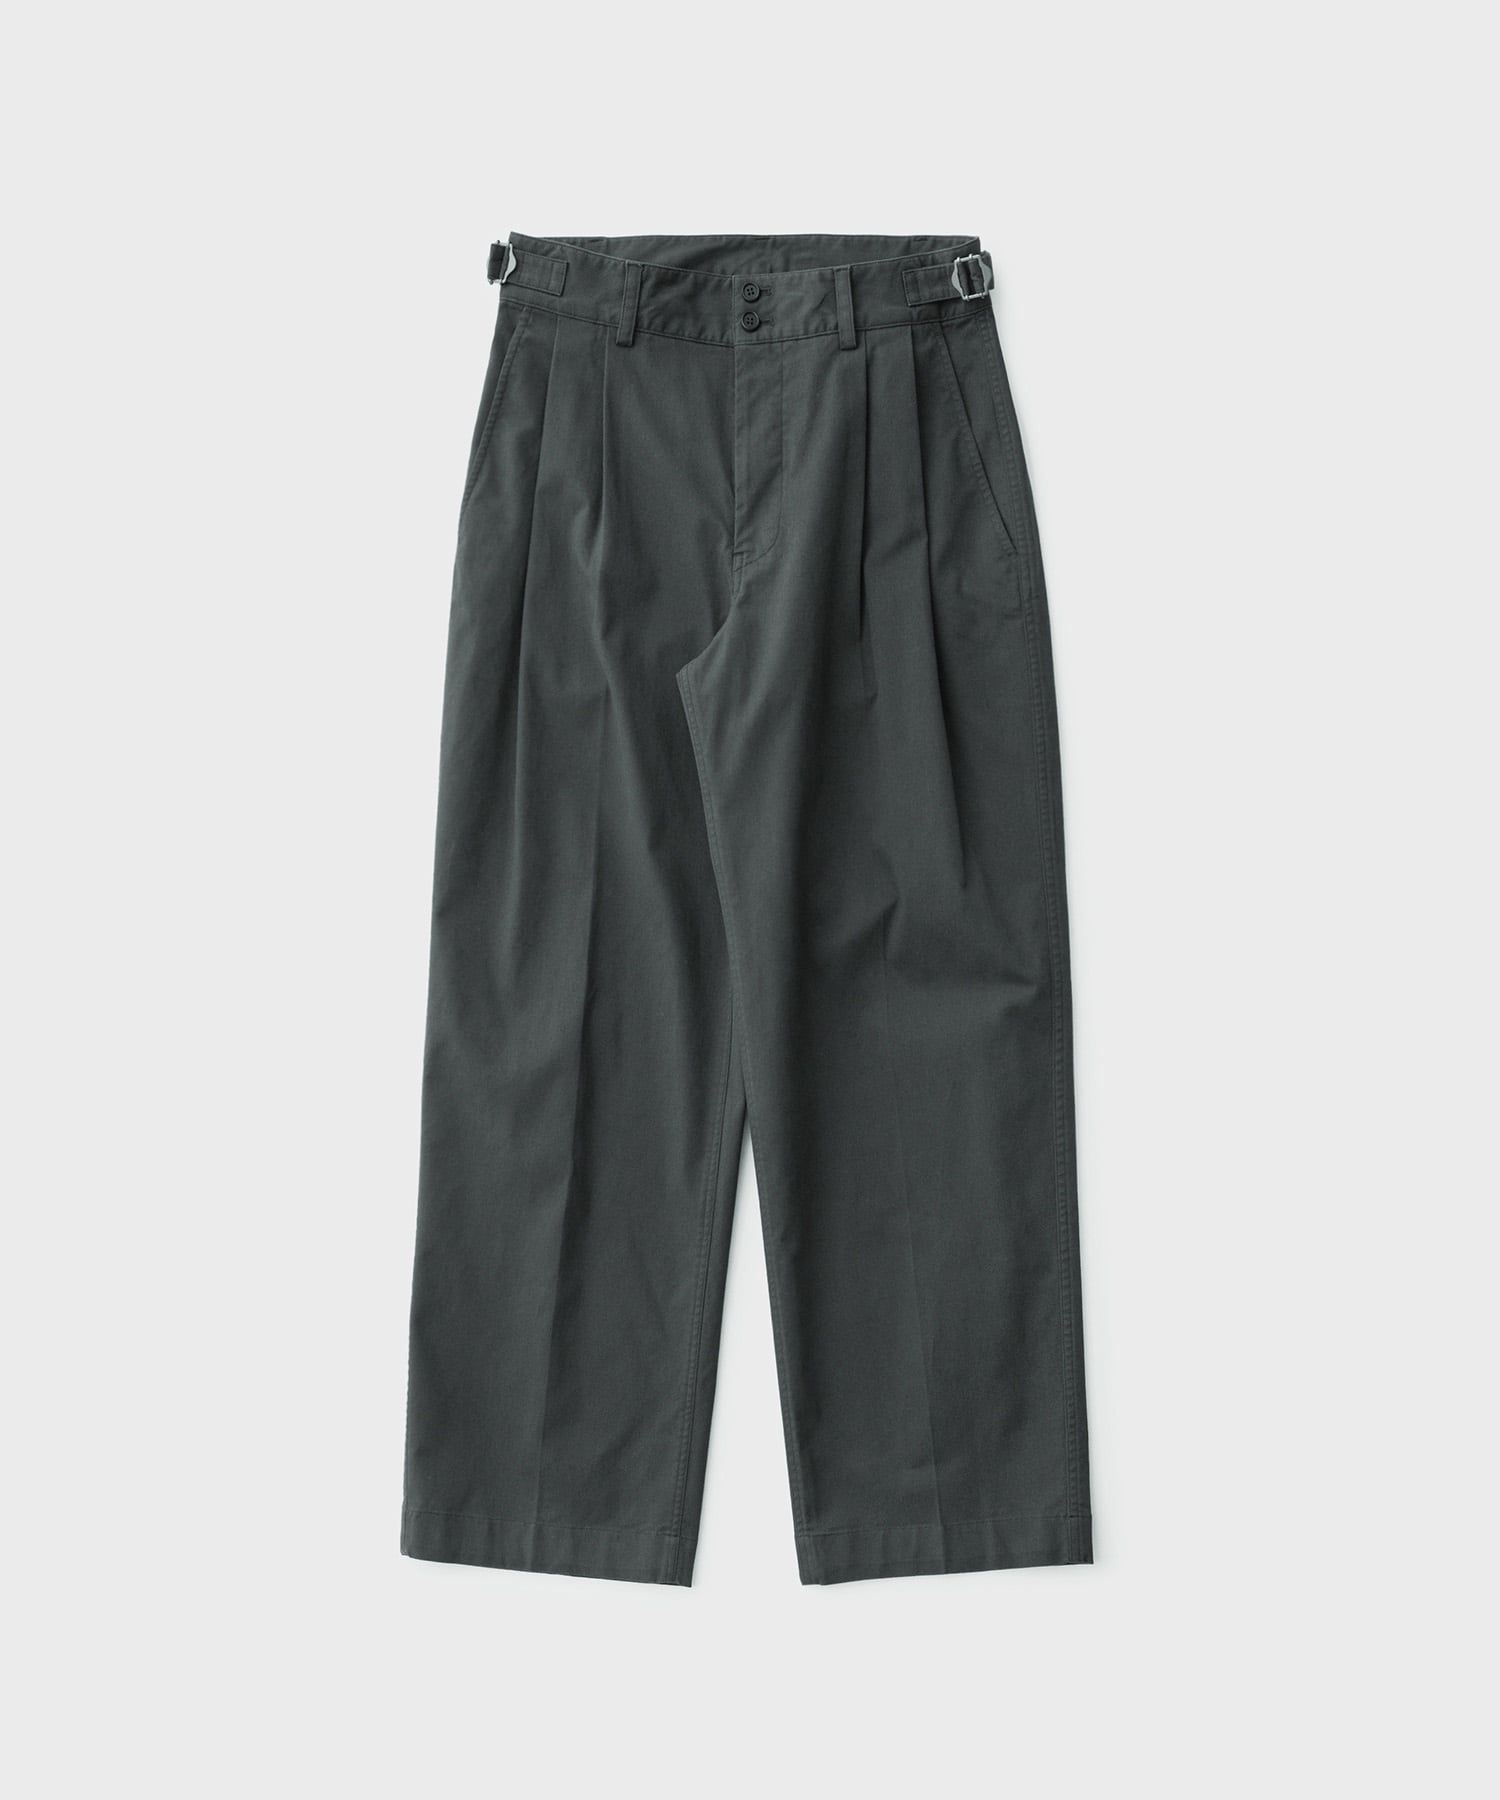 22AW Santiago Officer Pants (Graphite)